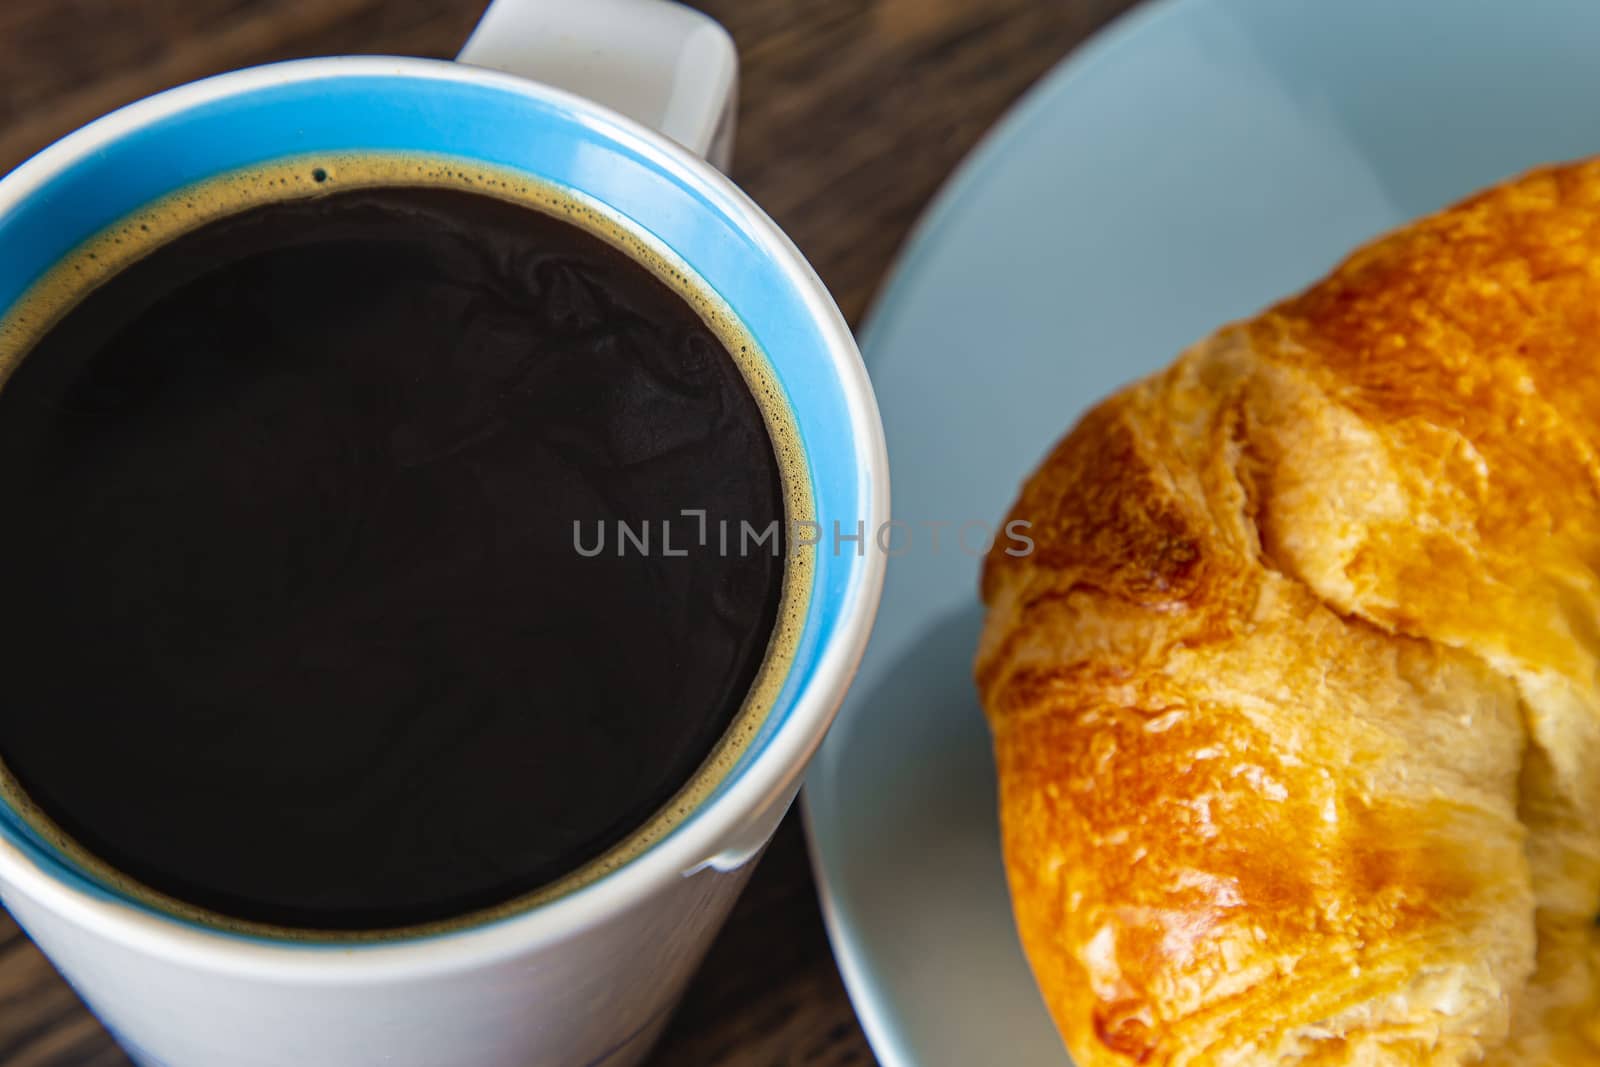 Coffee and croissant by mypstudio